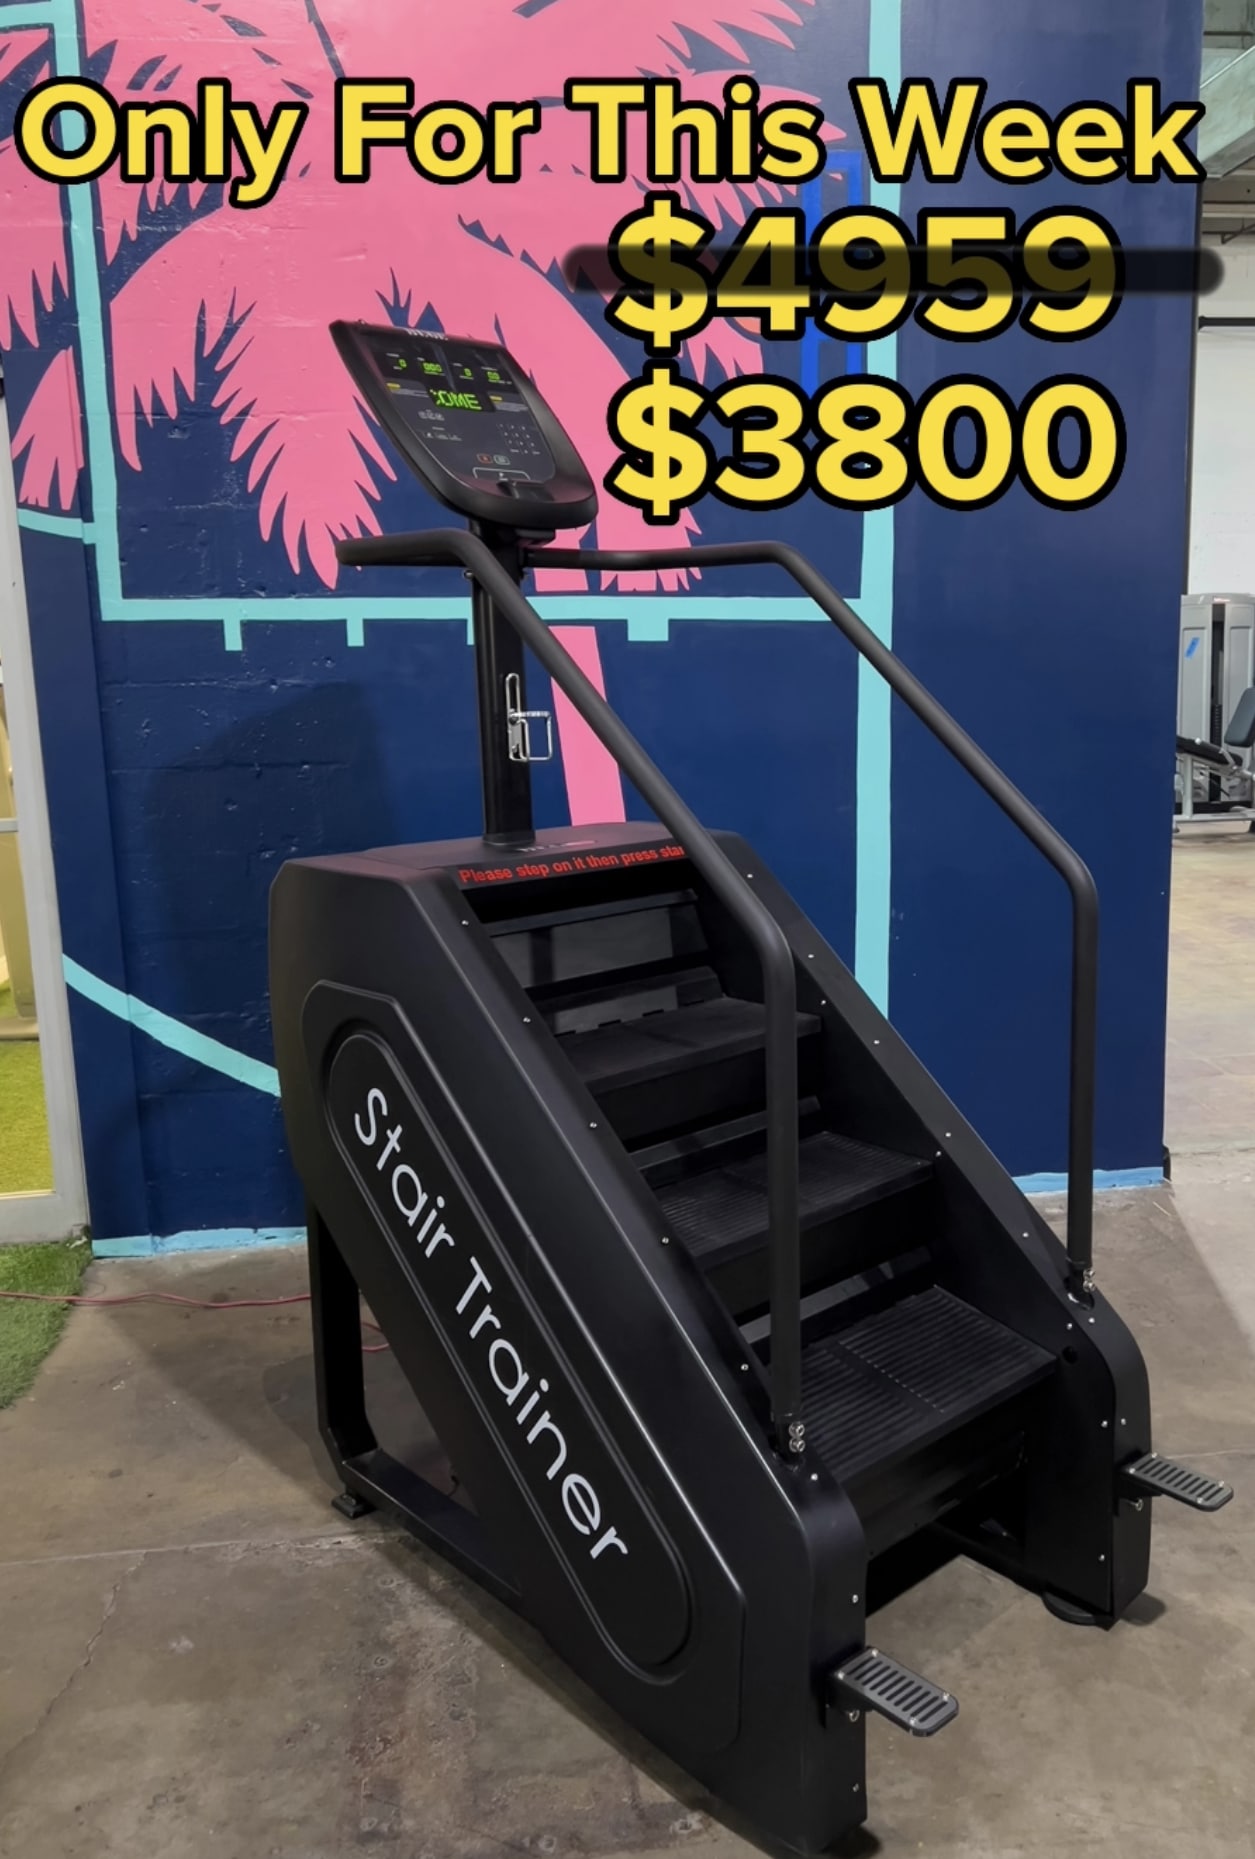 BUGE STEPMILL  From $4959 TO $3850